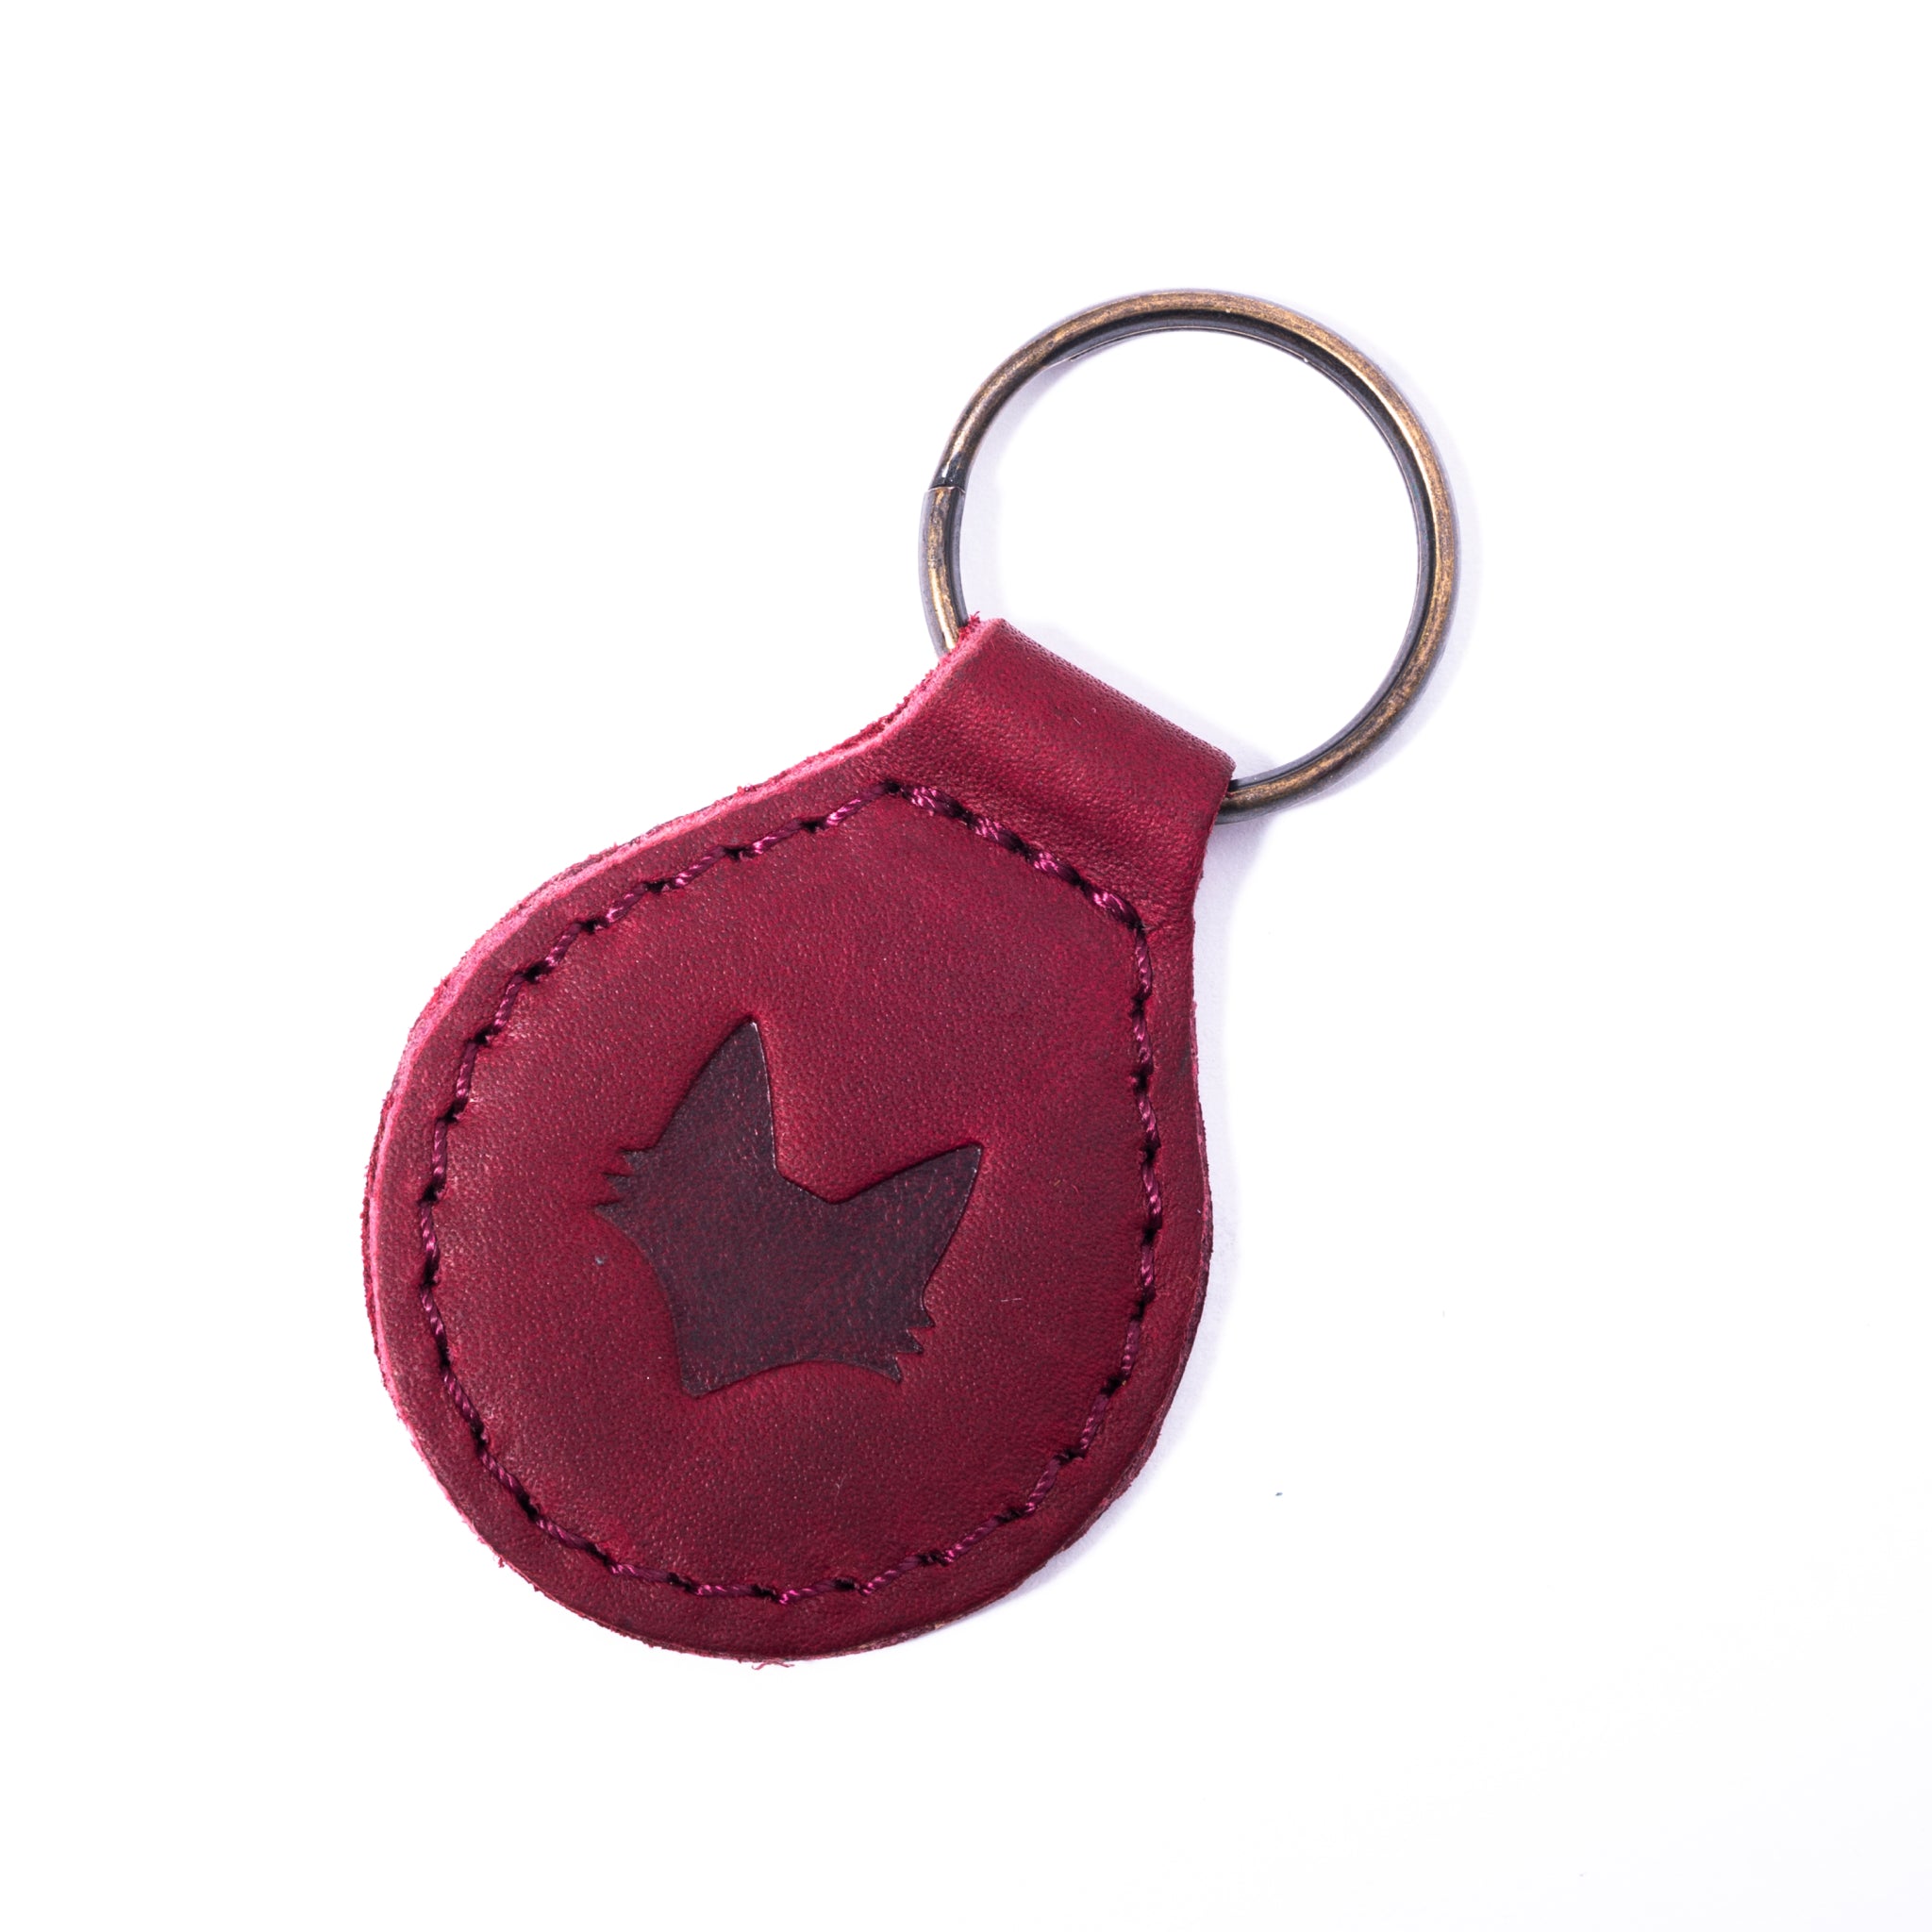 The GT-R leather keychain - Vaja